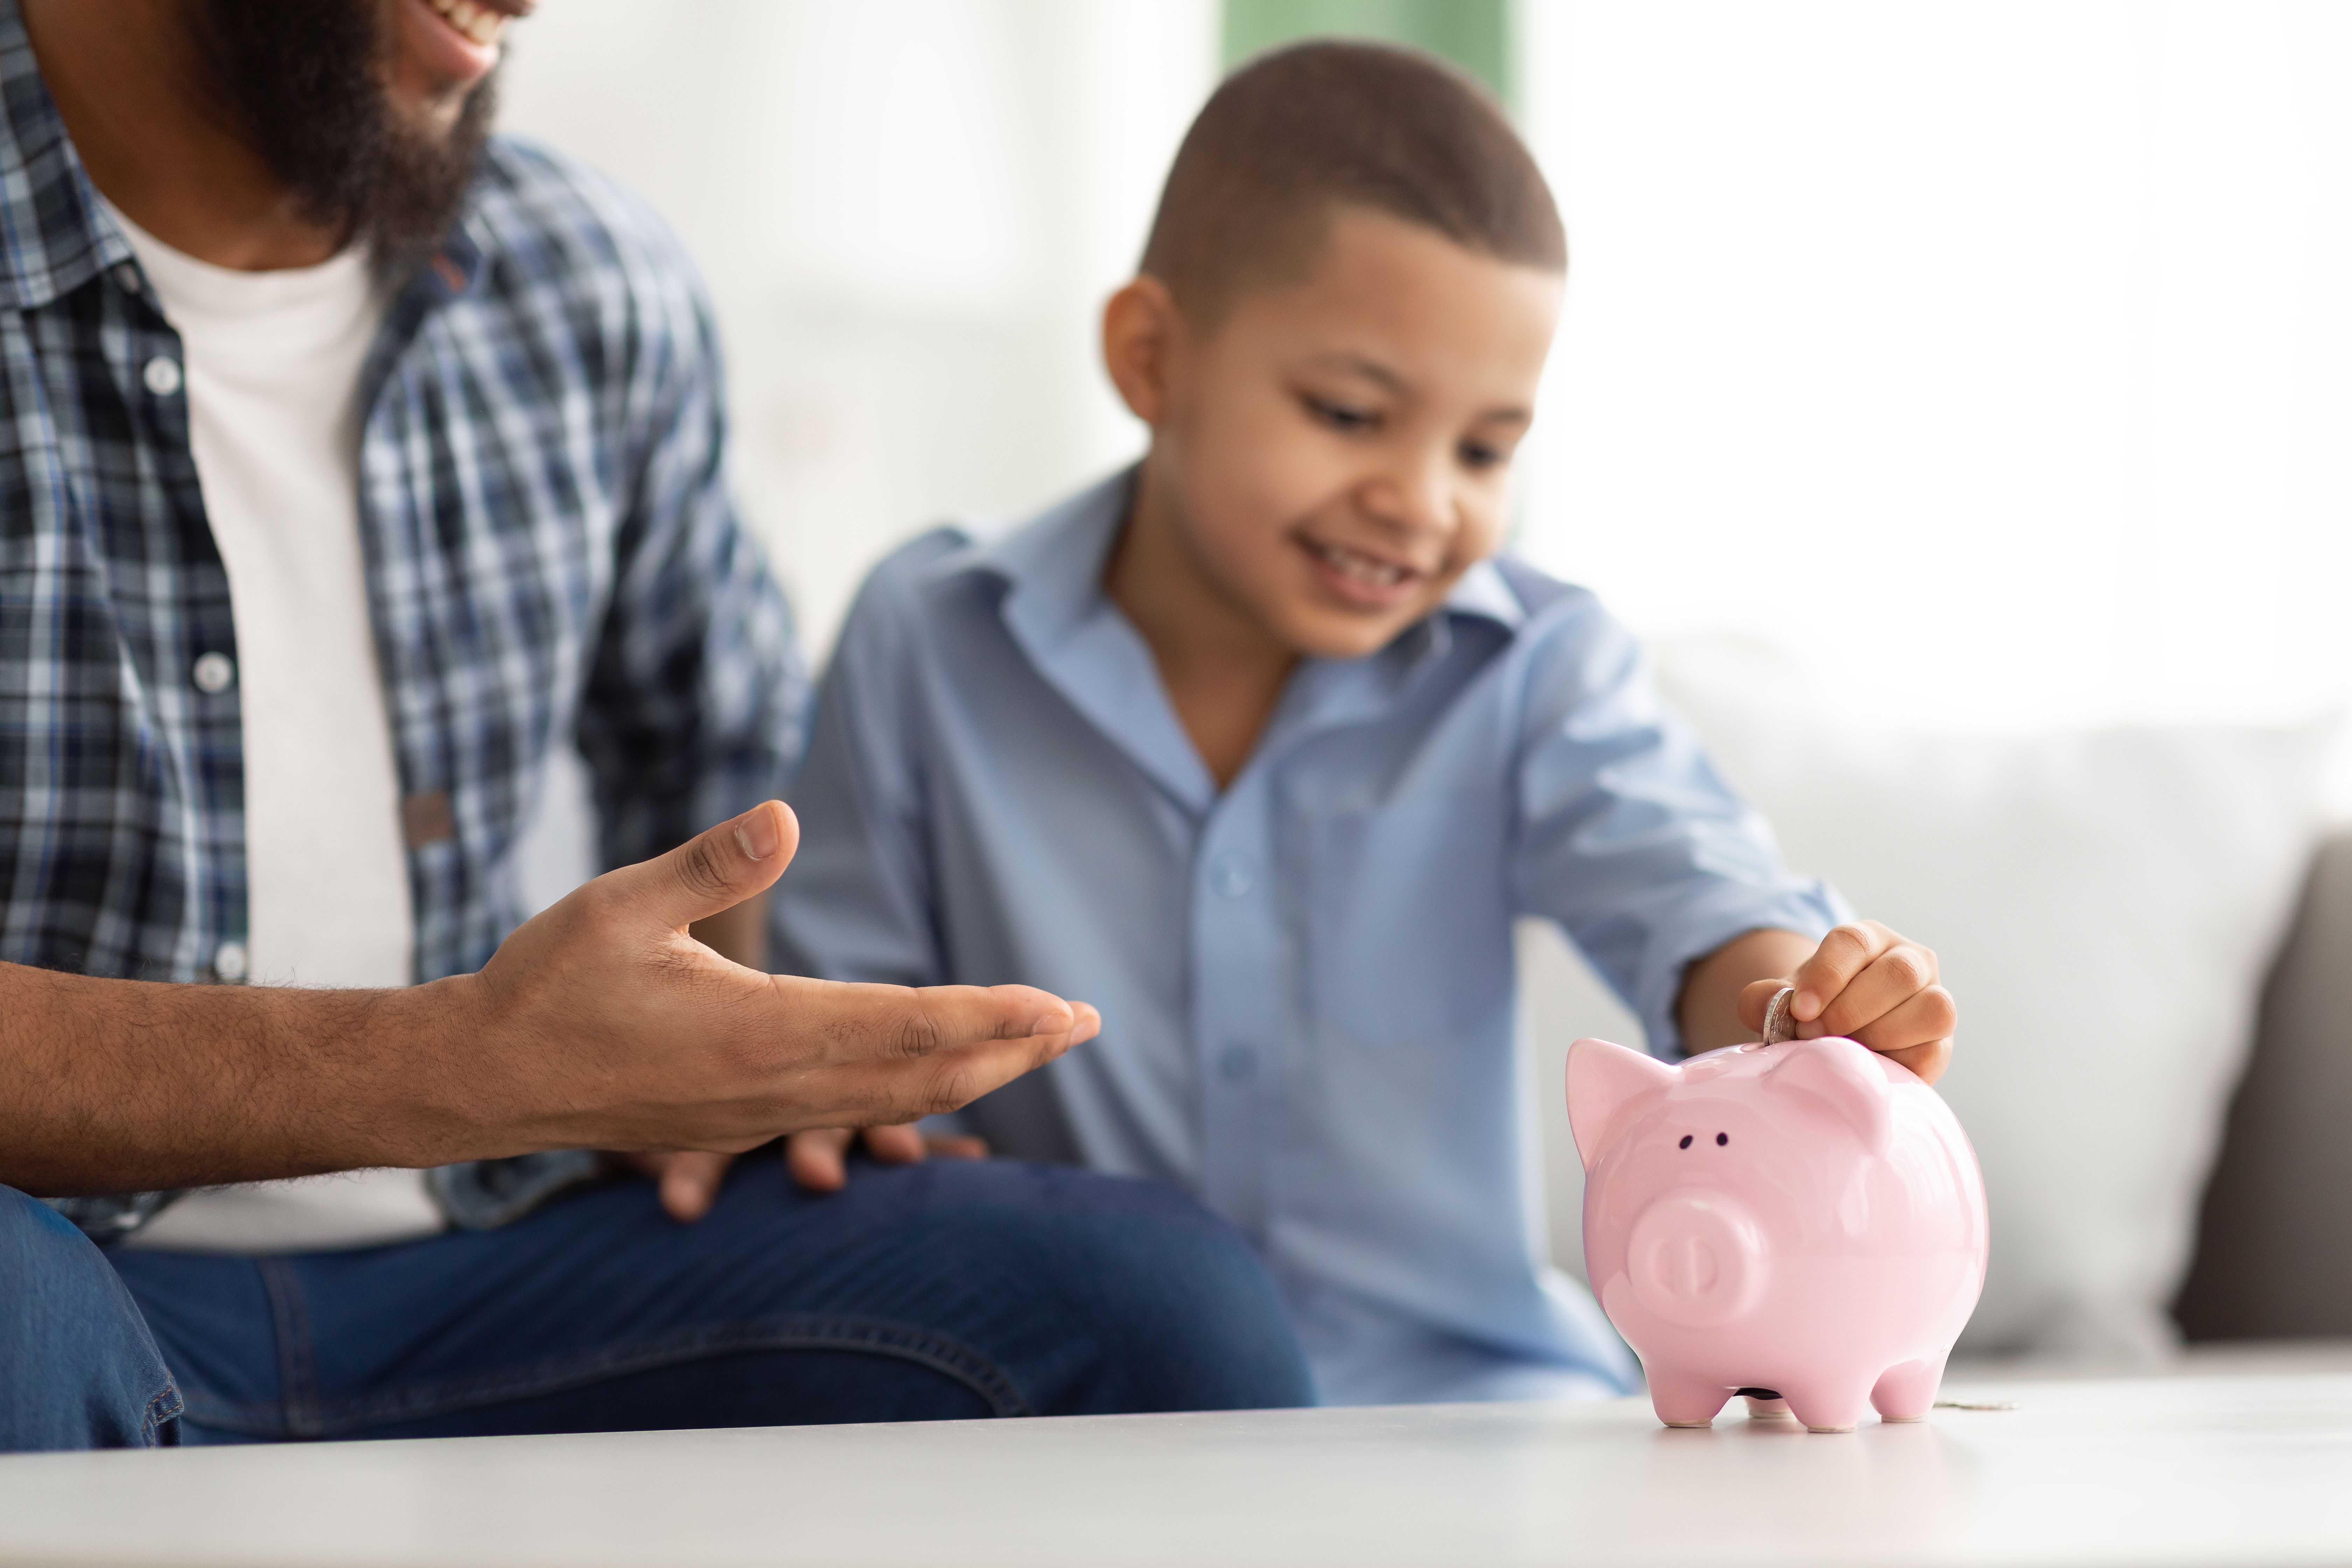 Personal Savings. Black Dad And Son Putting Coin In Piggybank Sitting At Home. Young Father Teaching His Child Financial Literacy And Budget Planning. Selective Focus On Piggy Bank, Cropped